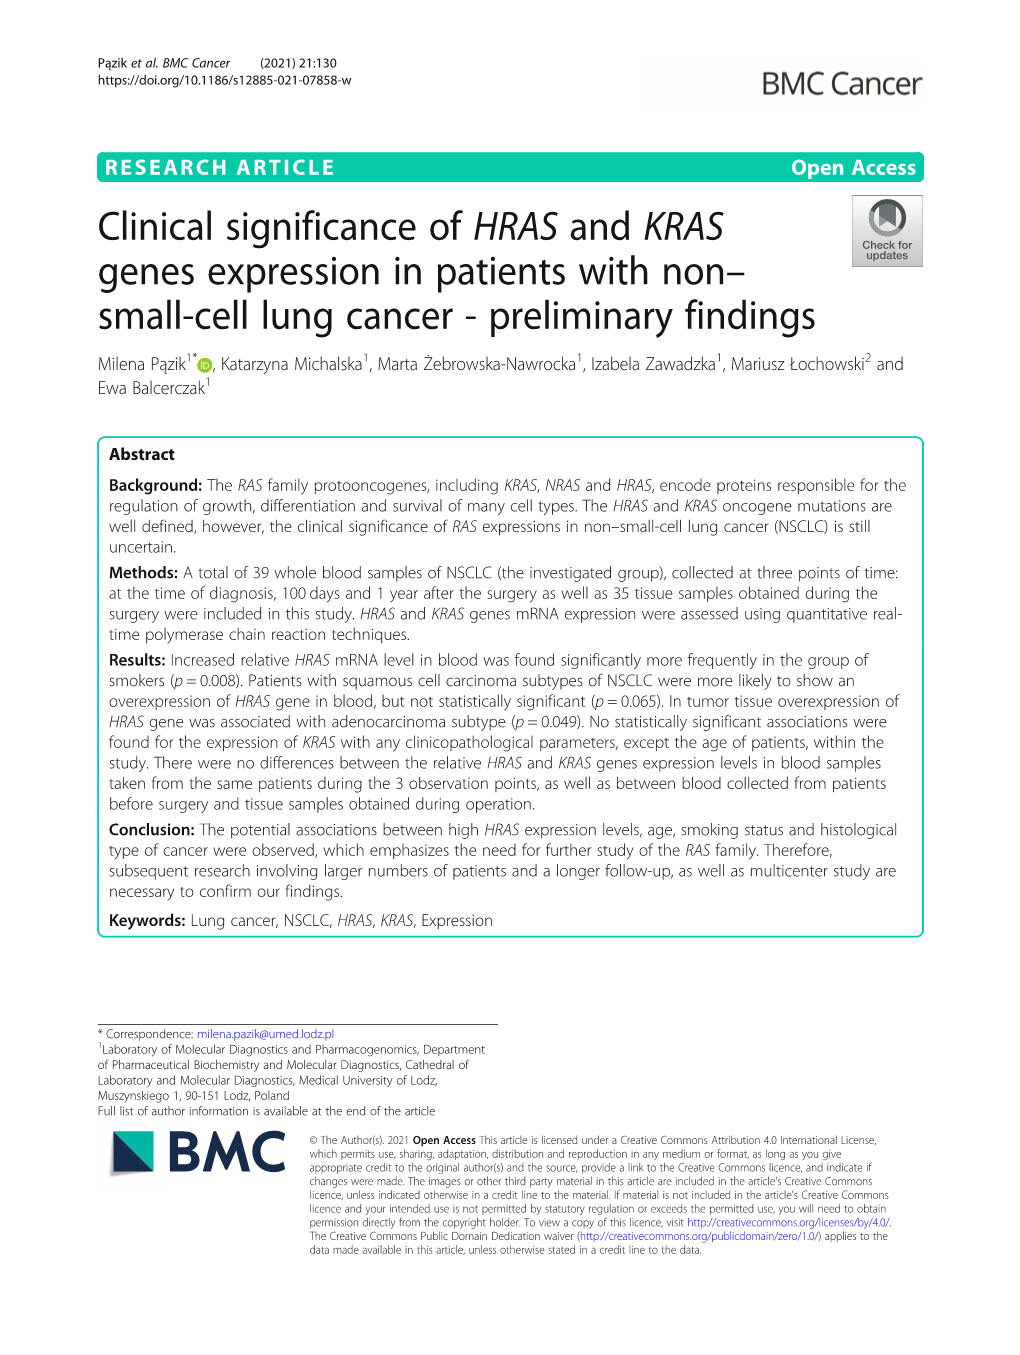 Clinical Significance of HRAS and KRAS Genes Expression in Patients